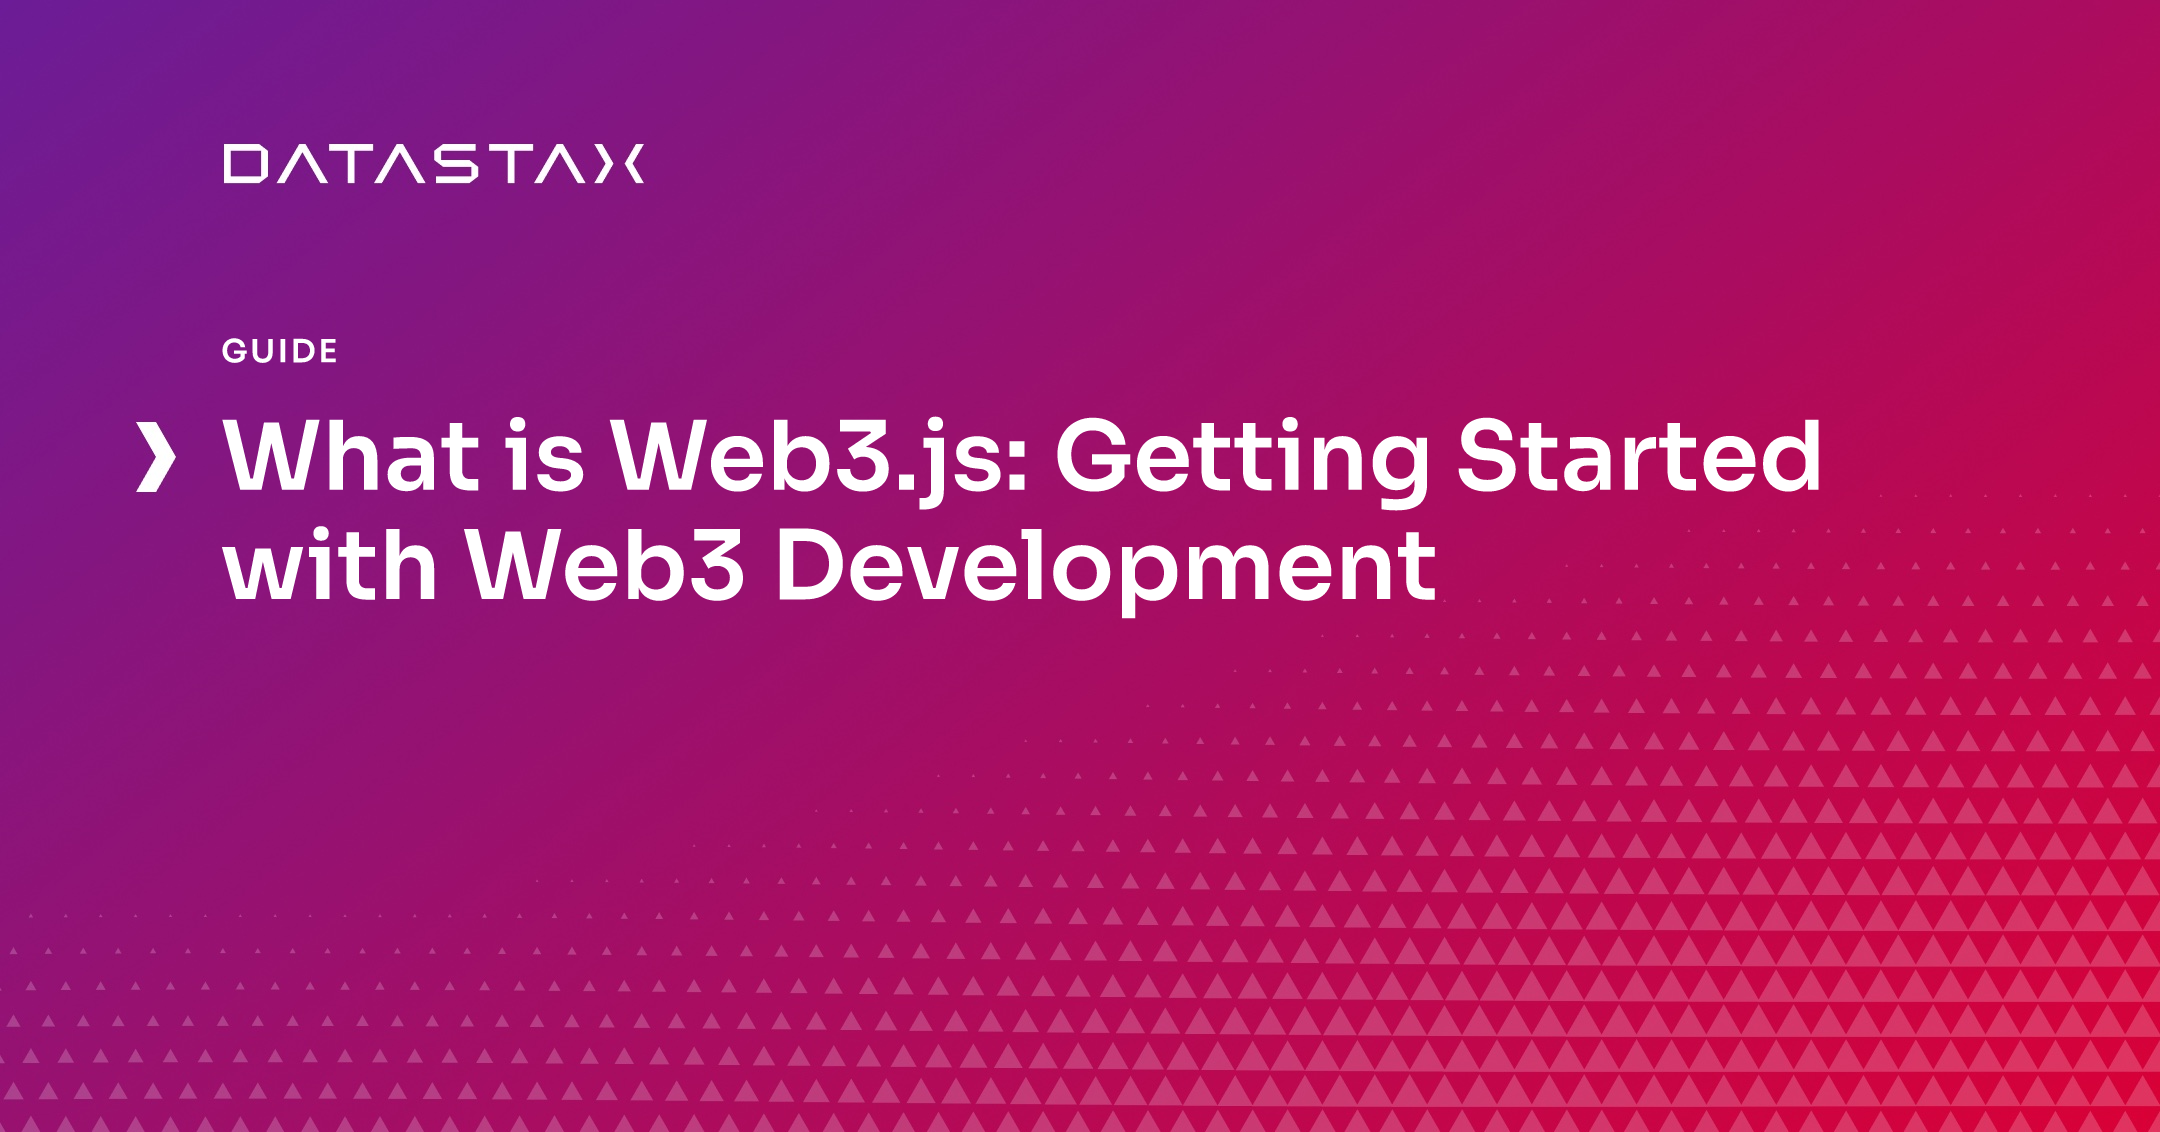 What is Web3.js: Getting Started with Web3 Development